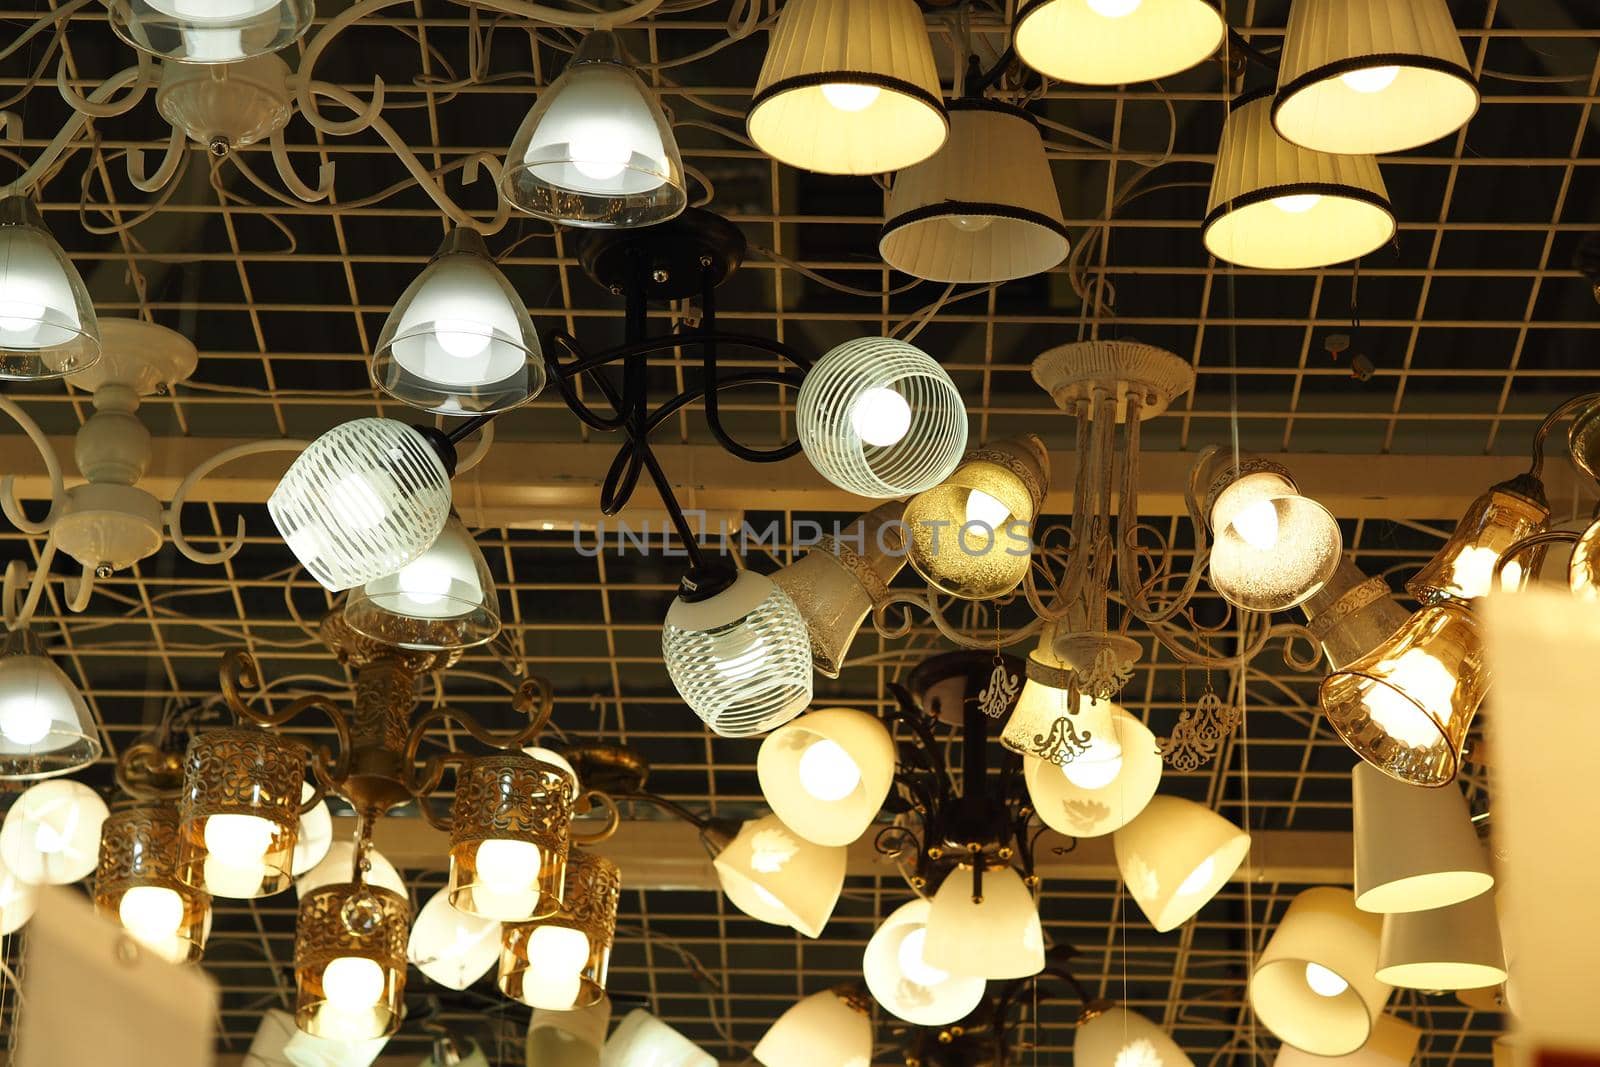 Sales, chandeliers, lamps and table lamps in the store. High quality photo